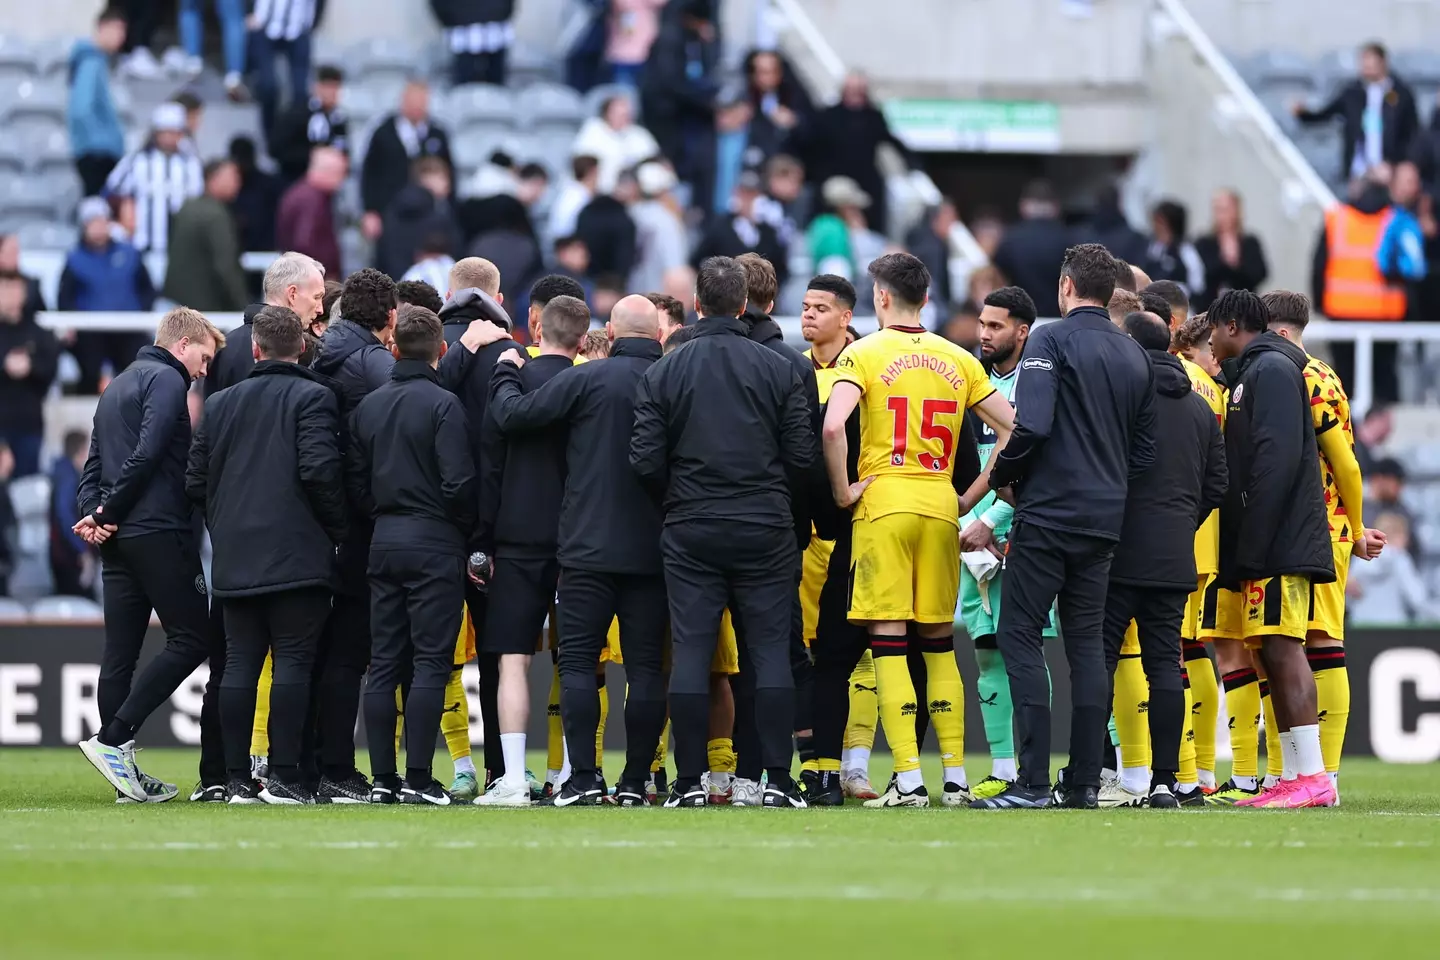 Chris Wilder leads a Sheffield United huddle following their defeat. Image: Getty